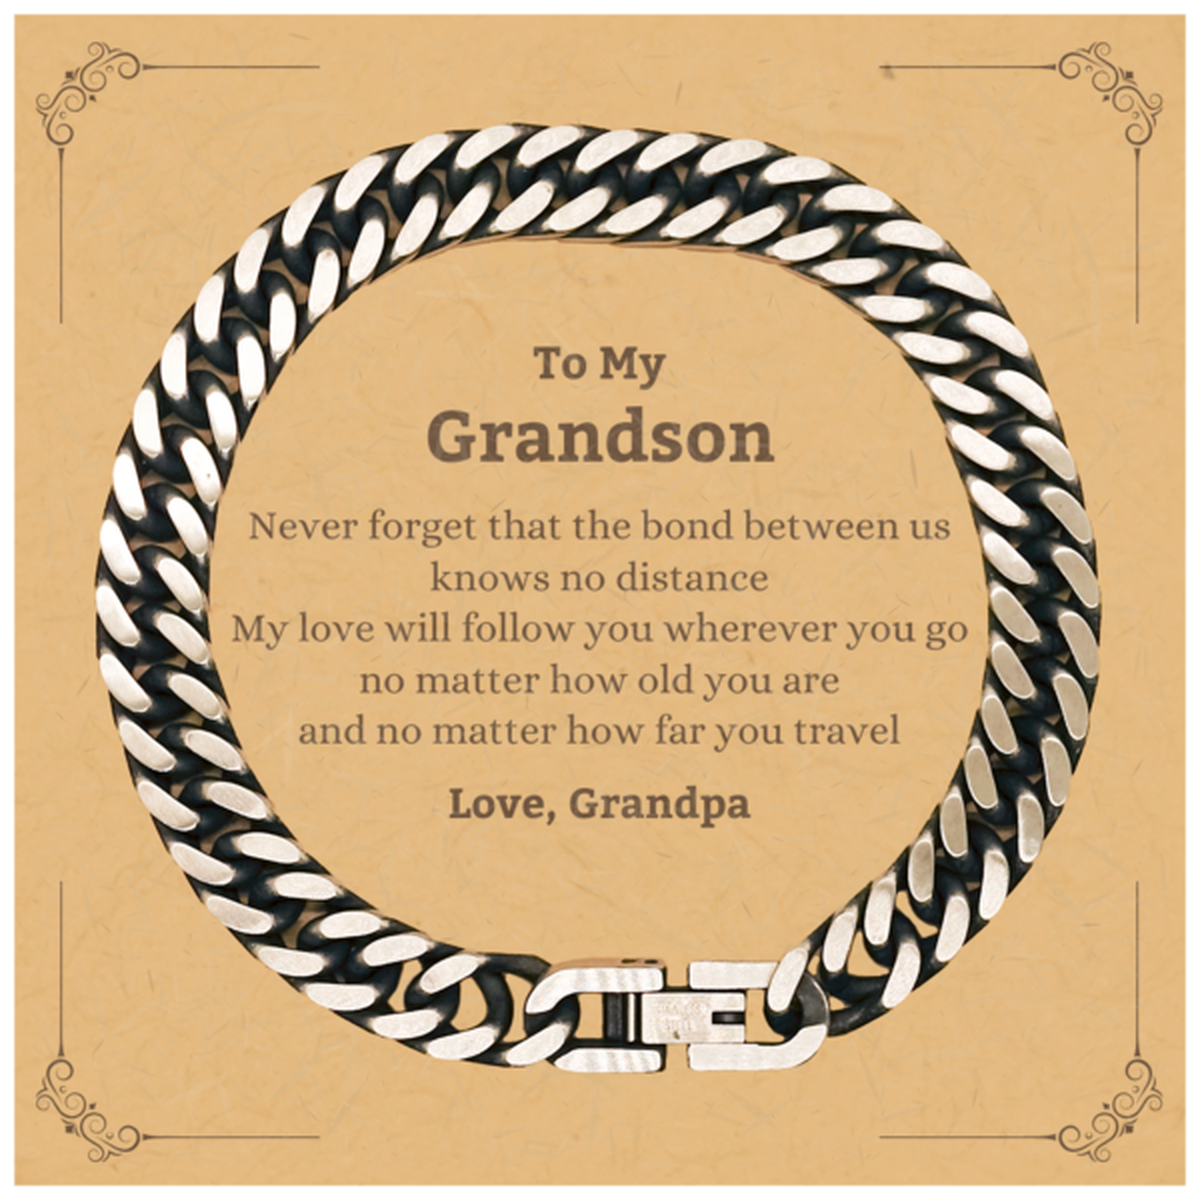 Grandson Birthday Gifts from Grandpa, Adjustable Cuban Link Chain Bracelet for Grandson Christmas Graduation Unique Gifts Grandson Never forget that the bond between us knows no distance. Love, Grandpa